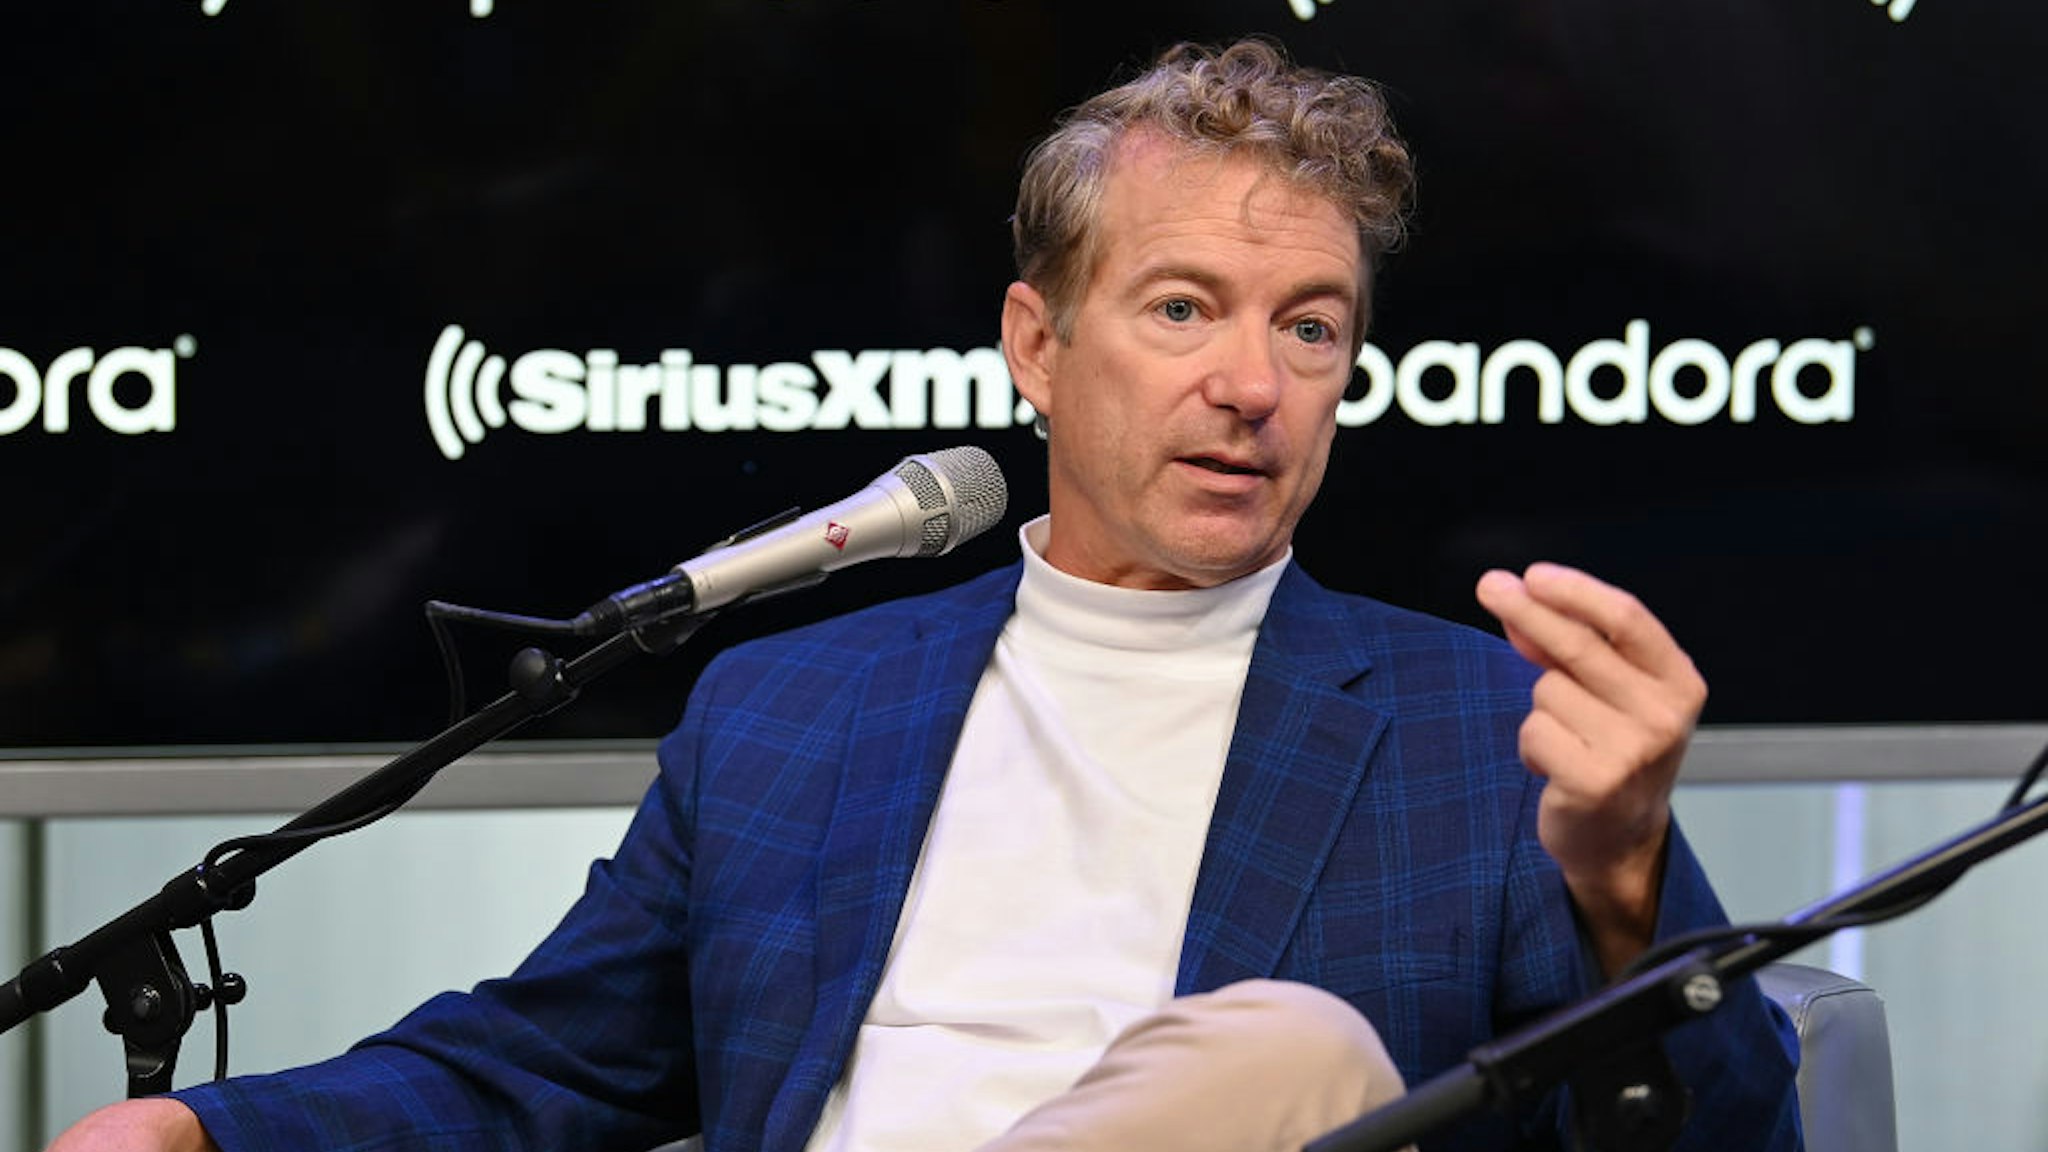 Senator Rand Paul talks with SiriusXM's Olivier Knox and Julie Mason during a Town Hall event on October 11, 2019 in New York City.